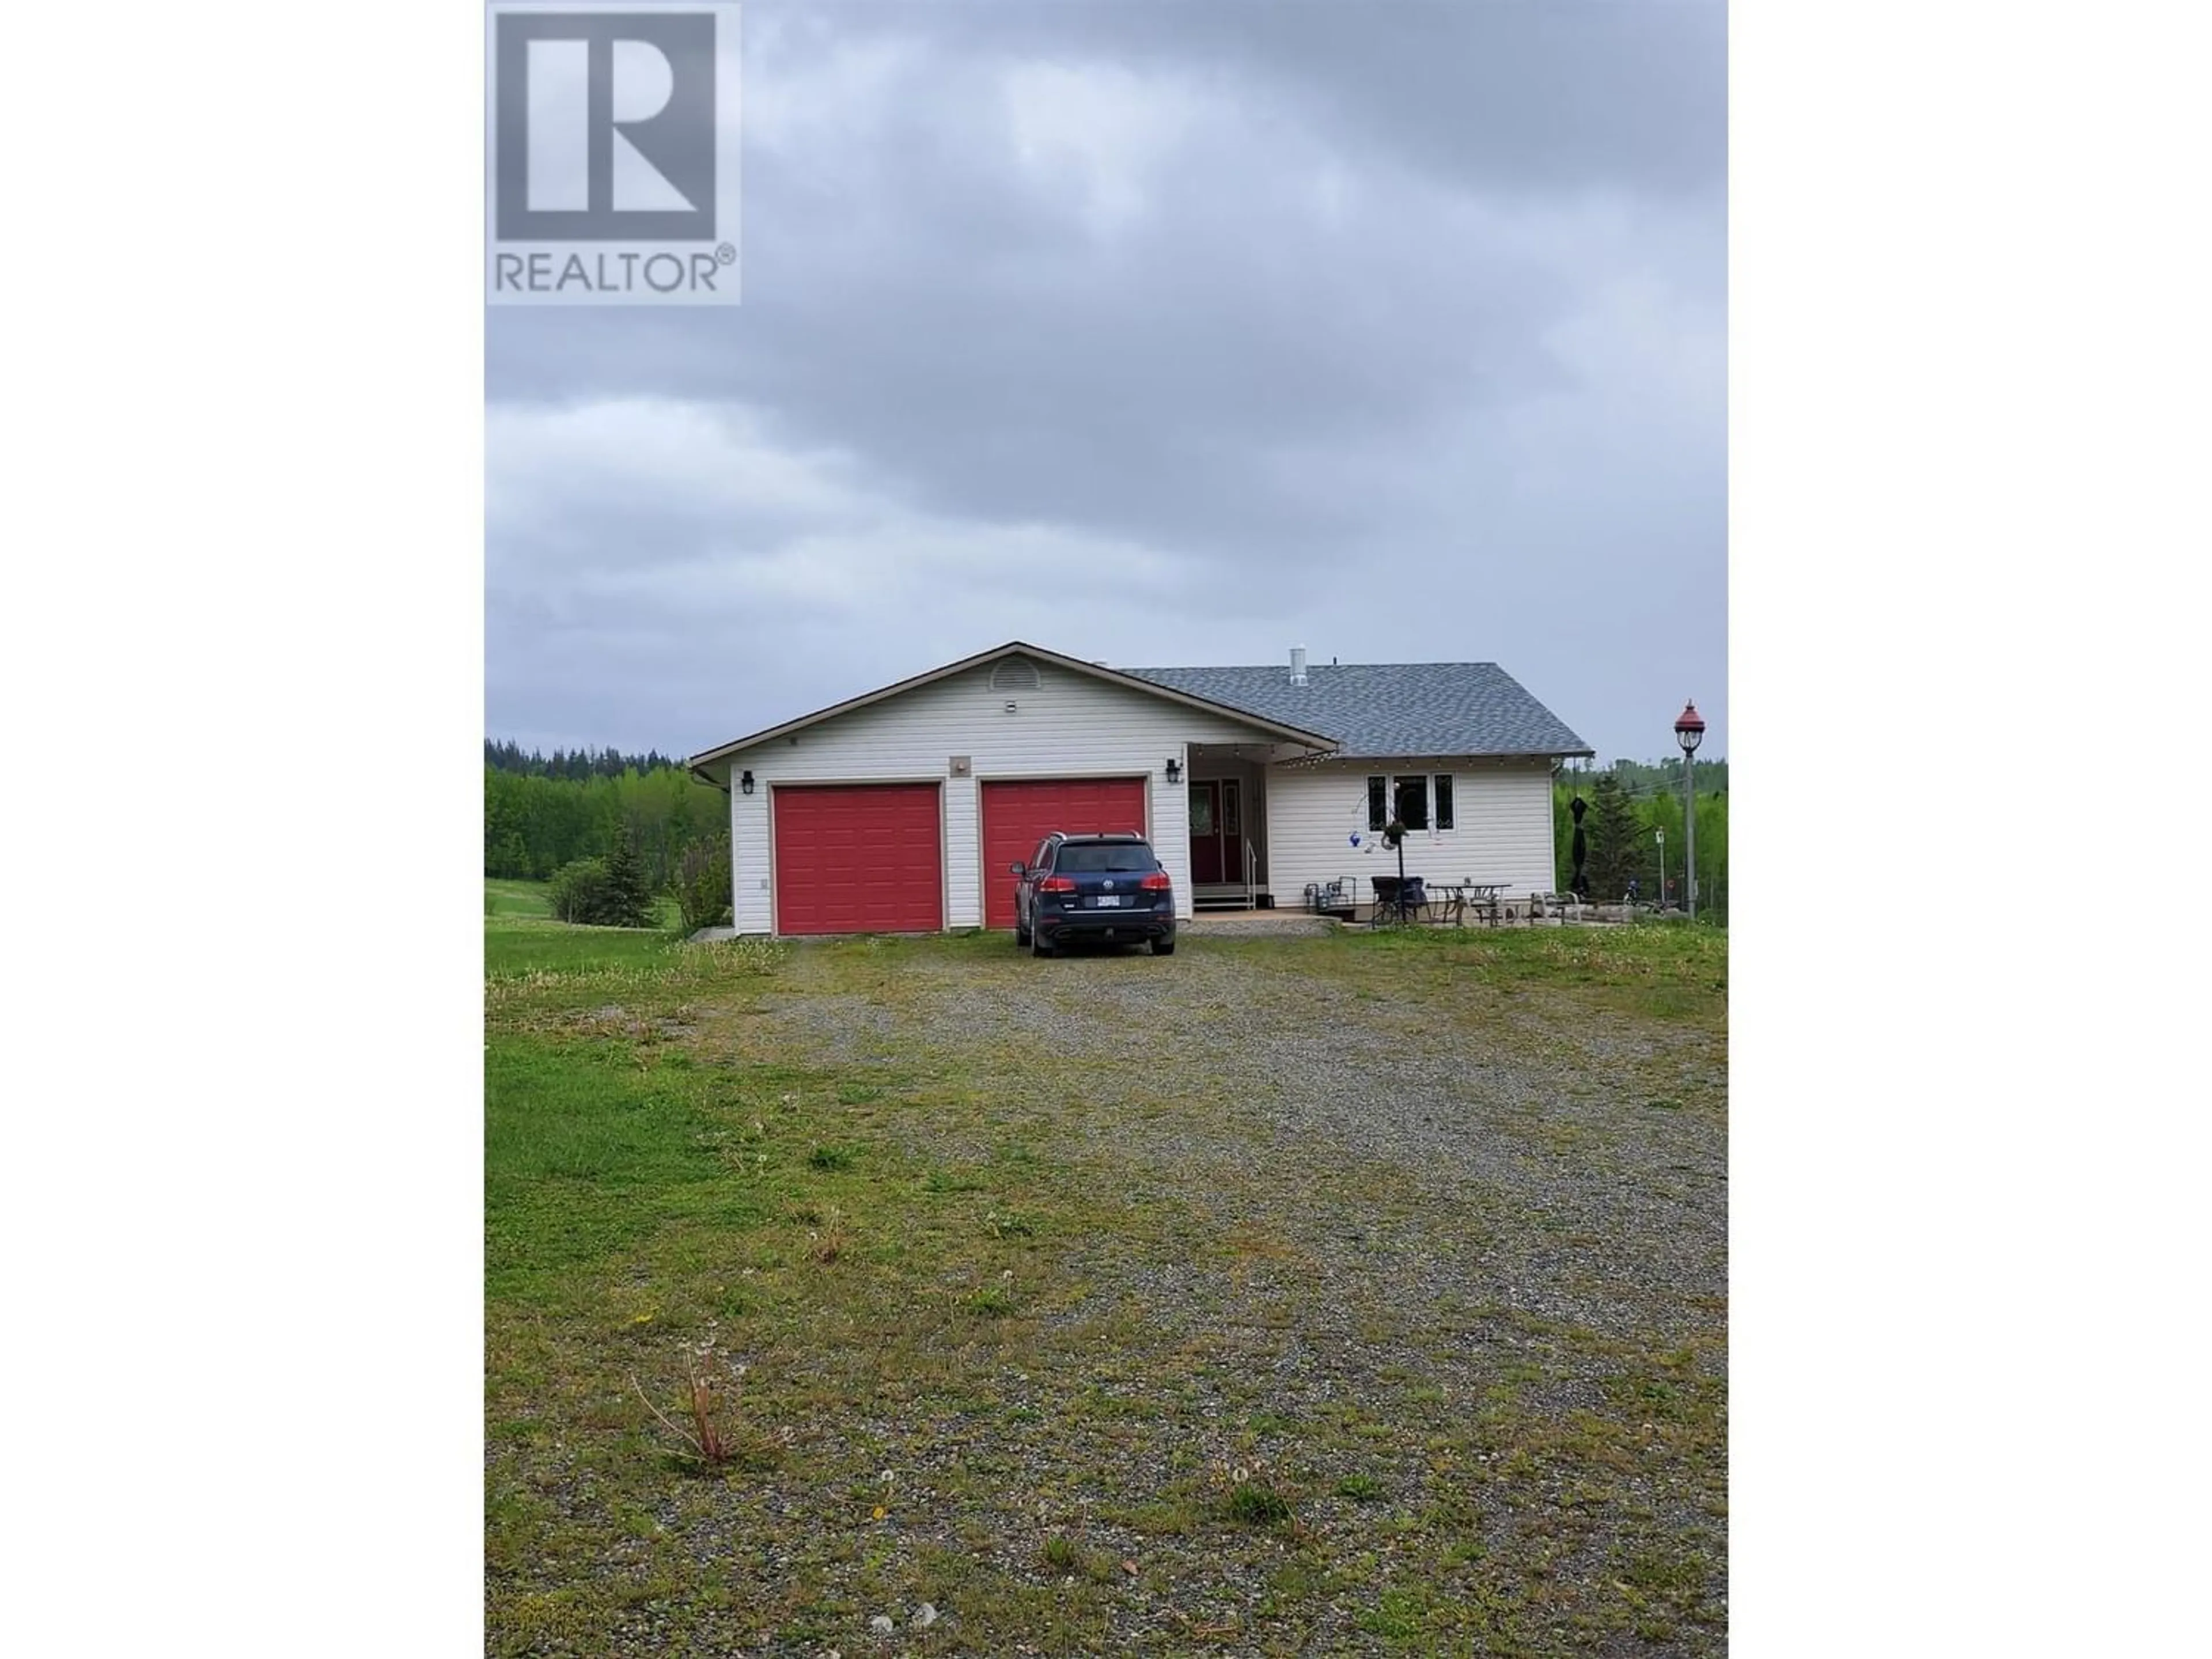 Shed for 444 CAMERON ROAD, Quesnel British Columbia V2J6Y3